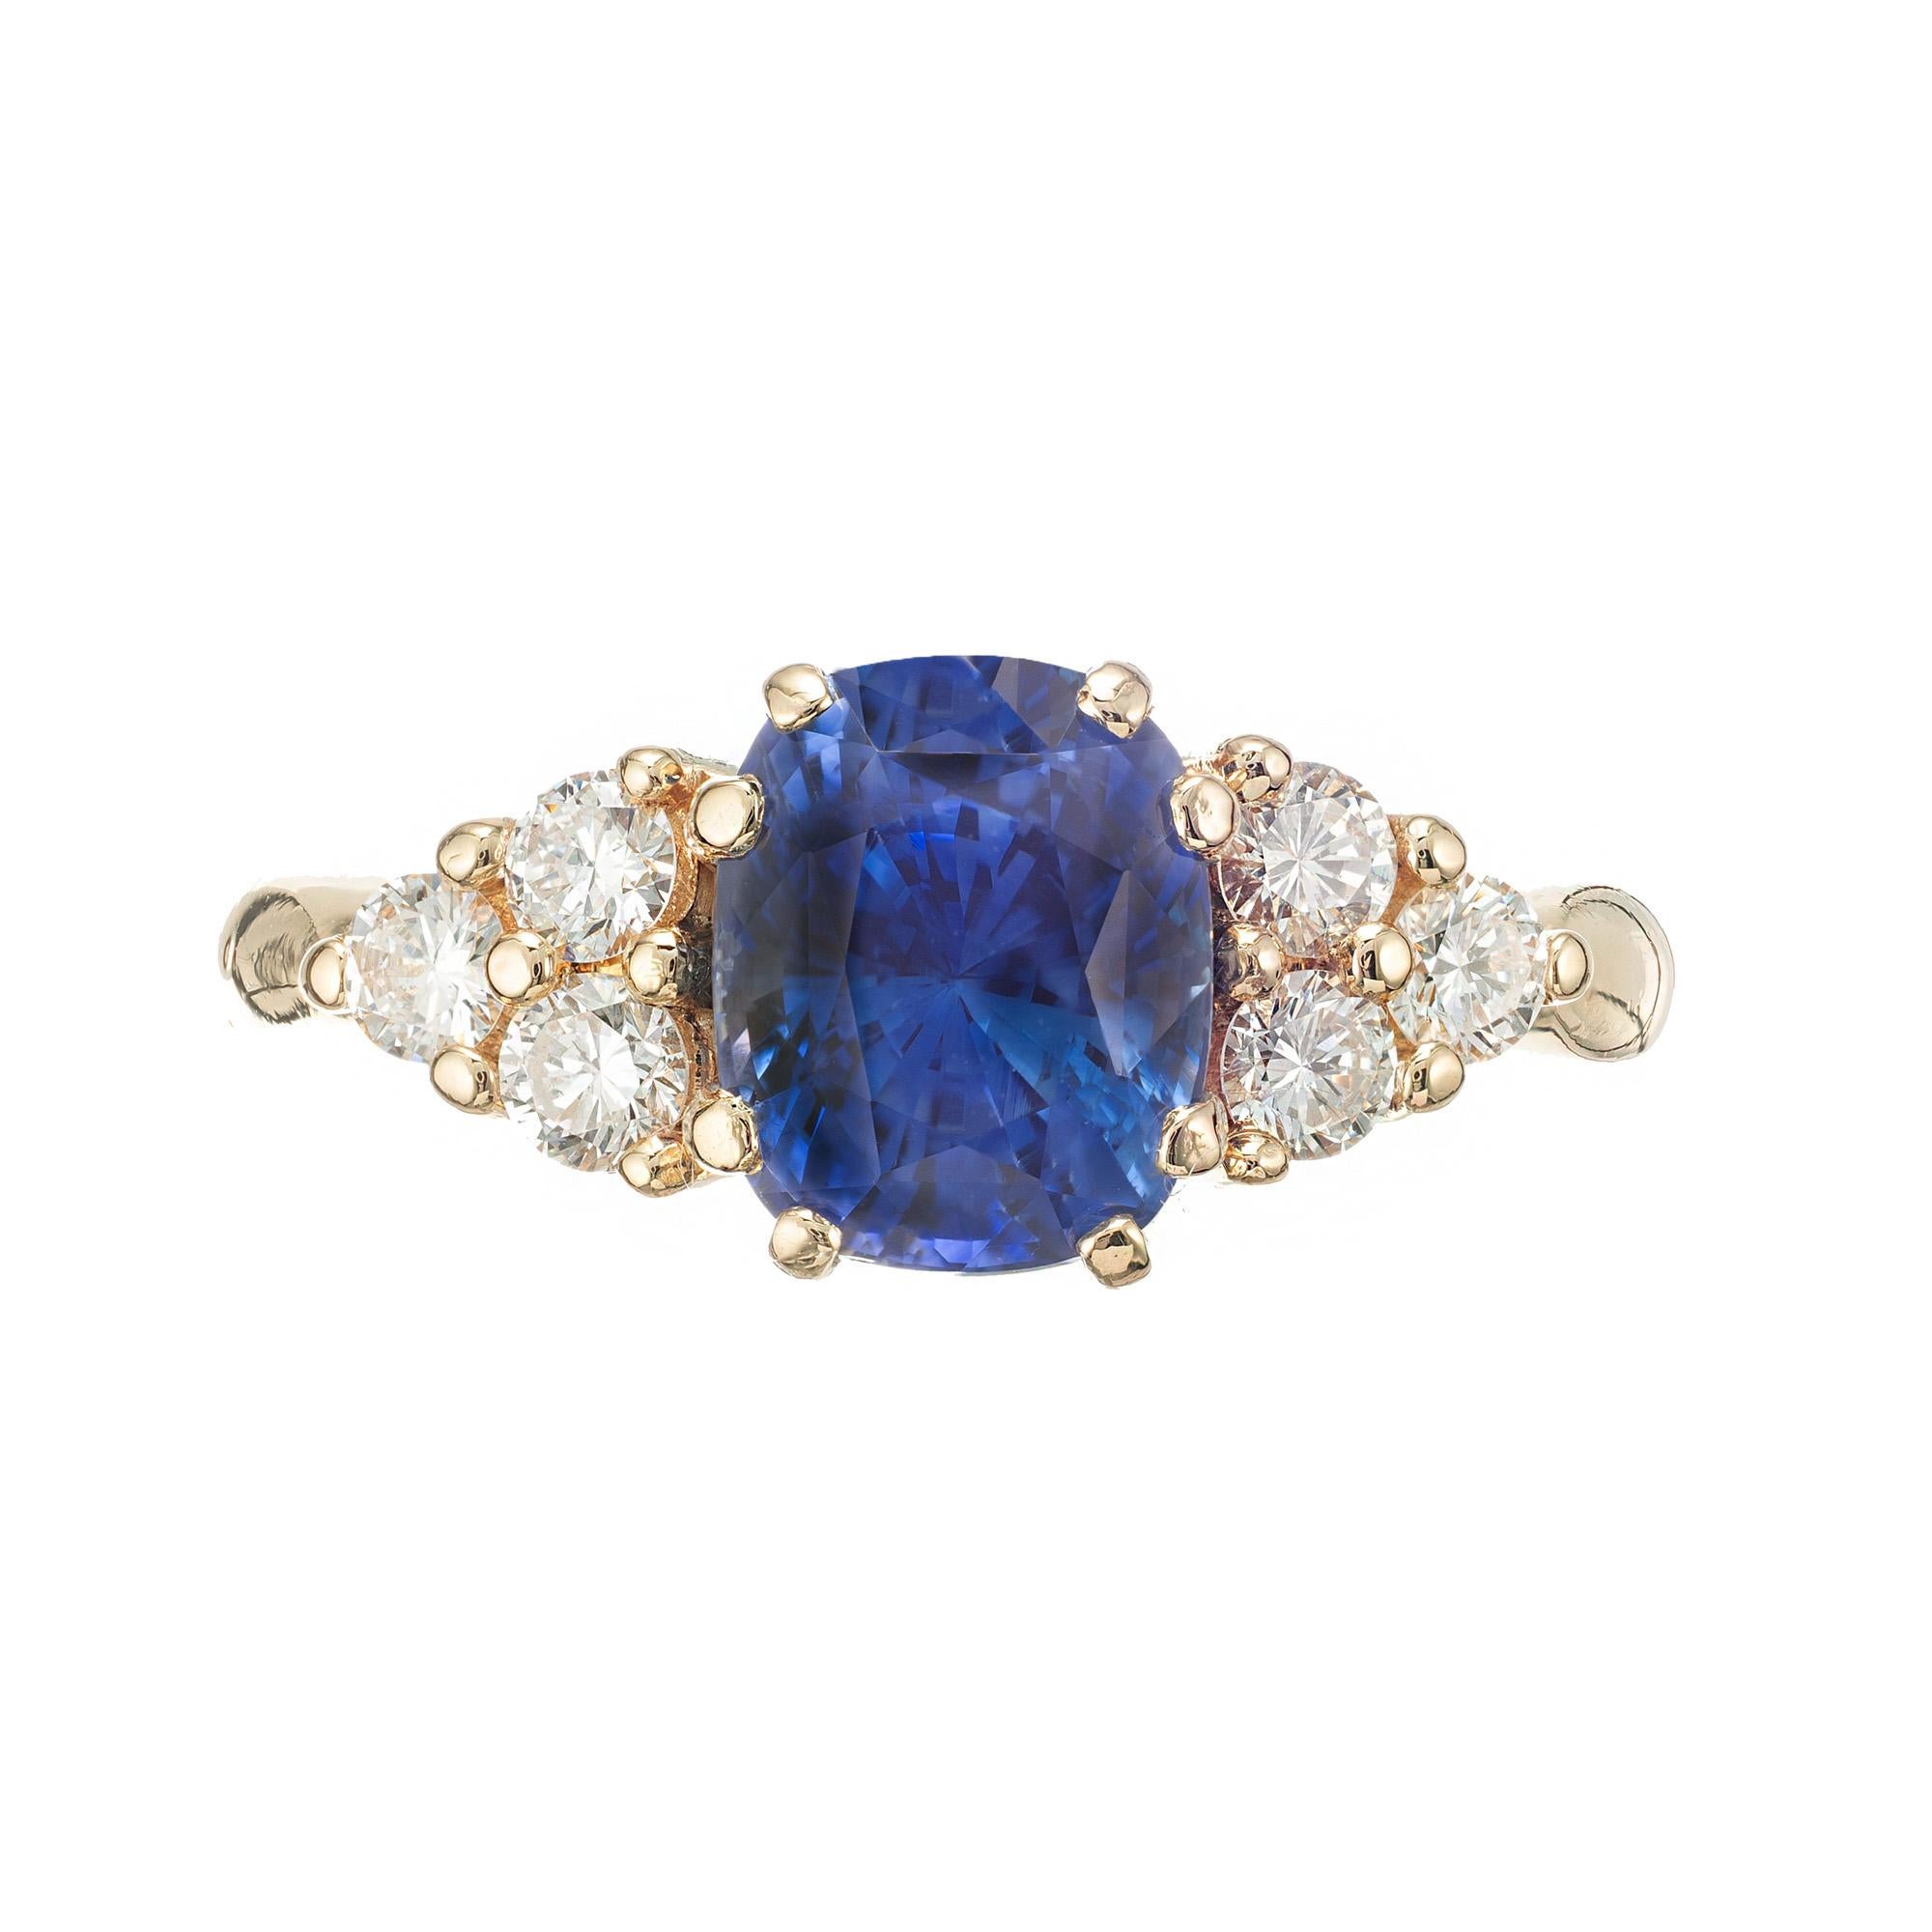 Cornflower blue oval sapphire and diamond engagement ring. GIA certified natural simple heat only, no residue. 14k yellow gold setting with 6 accent round diamonds on each side. Designed and crafted in the Peter Suchy Workshop. 

1 oval blue SI